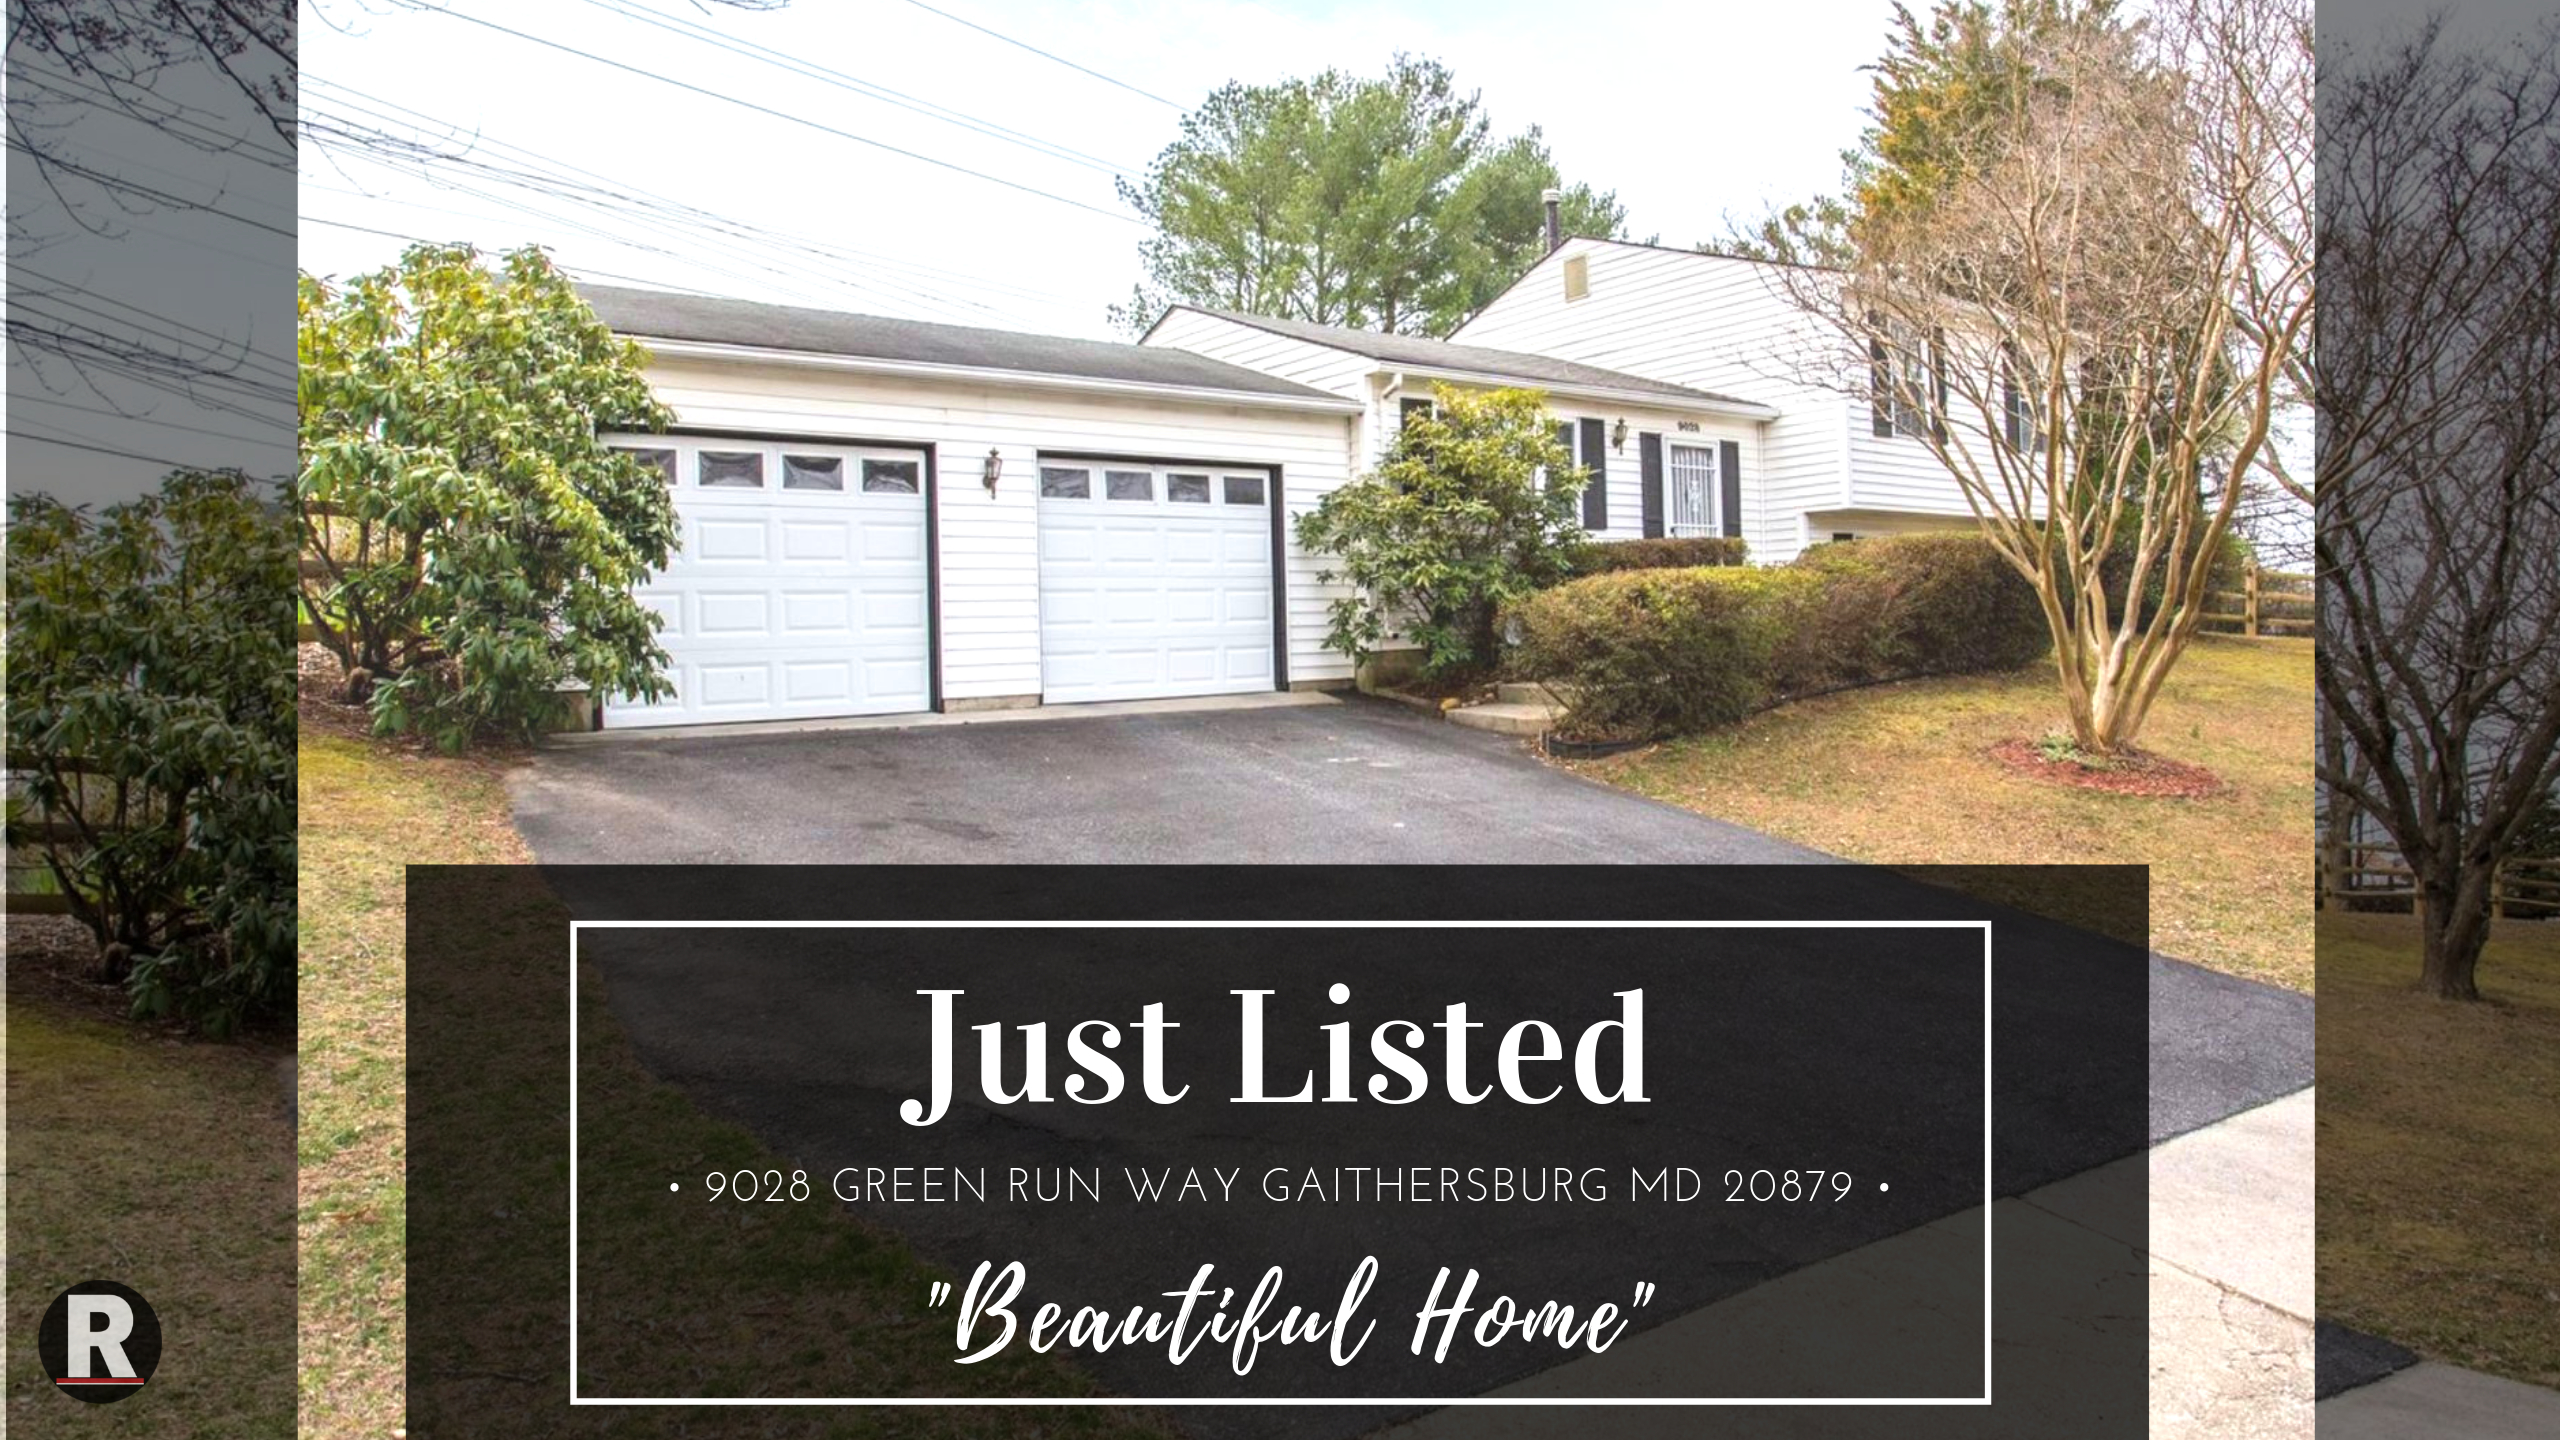 Just Listed! 9028 Green Run Way Gaithersburg MD 20879